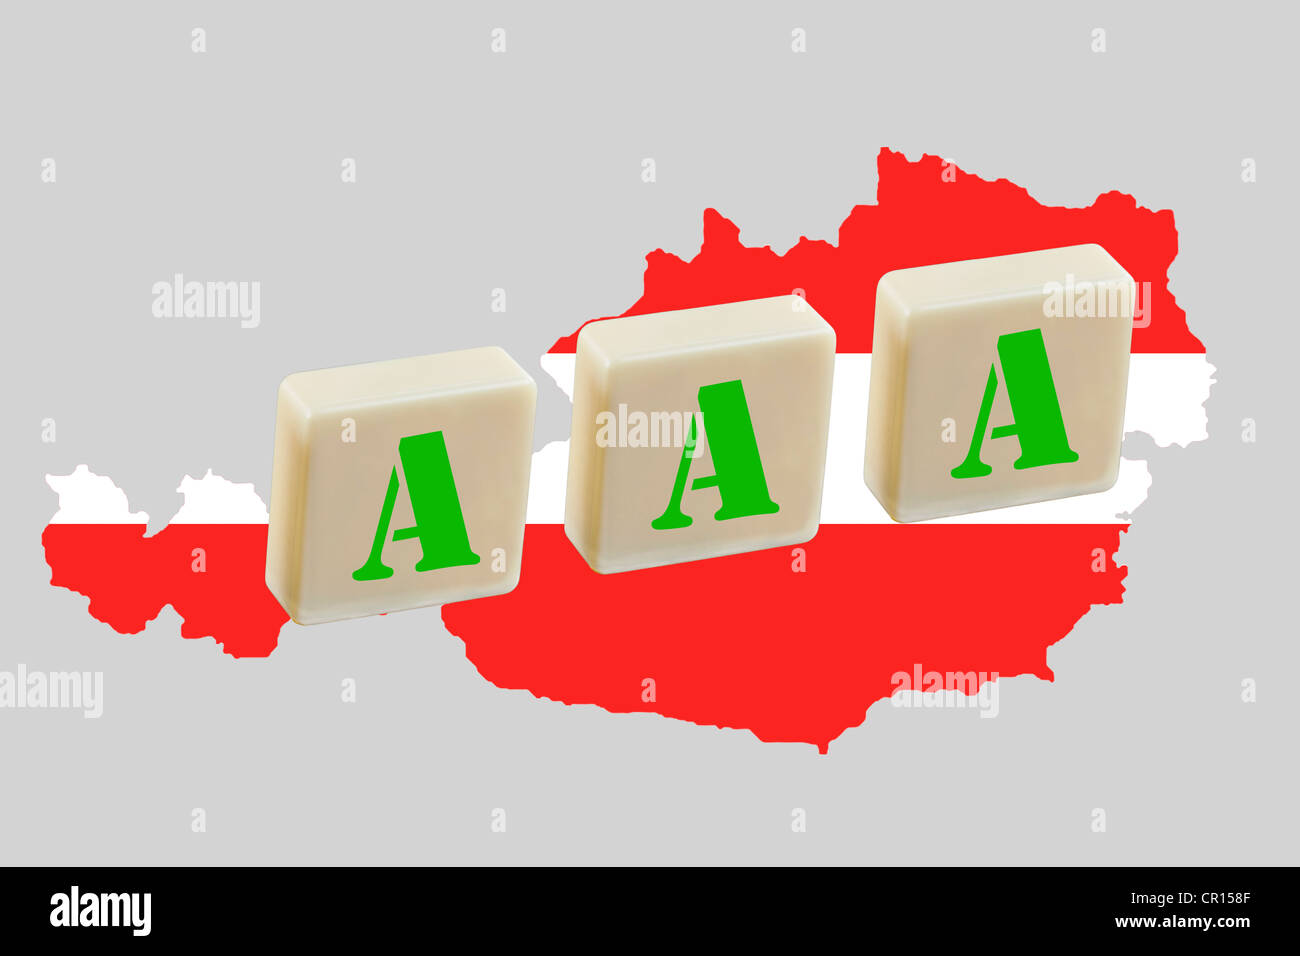 Three A's on a map of Austria, symbolic image for the triple-A rating by the rating agencies Stock Photo